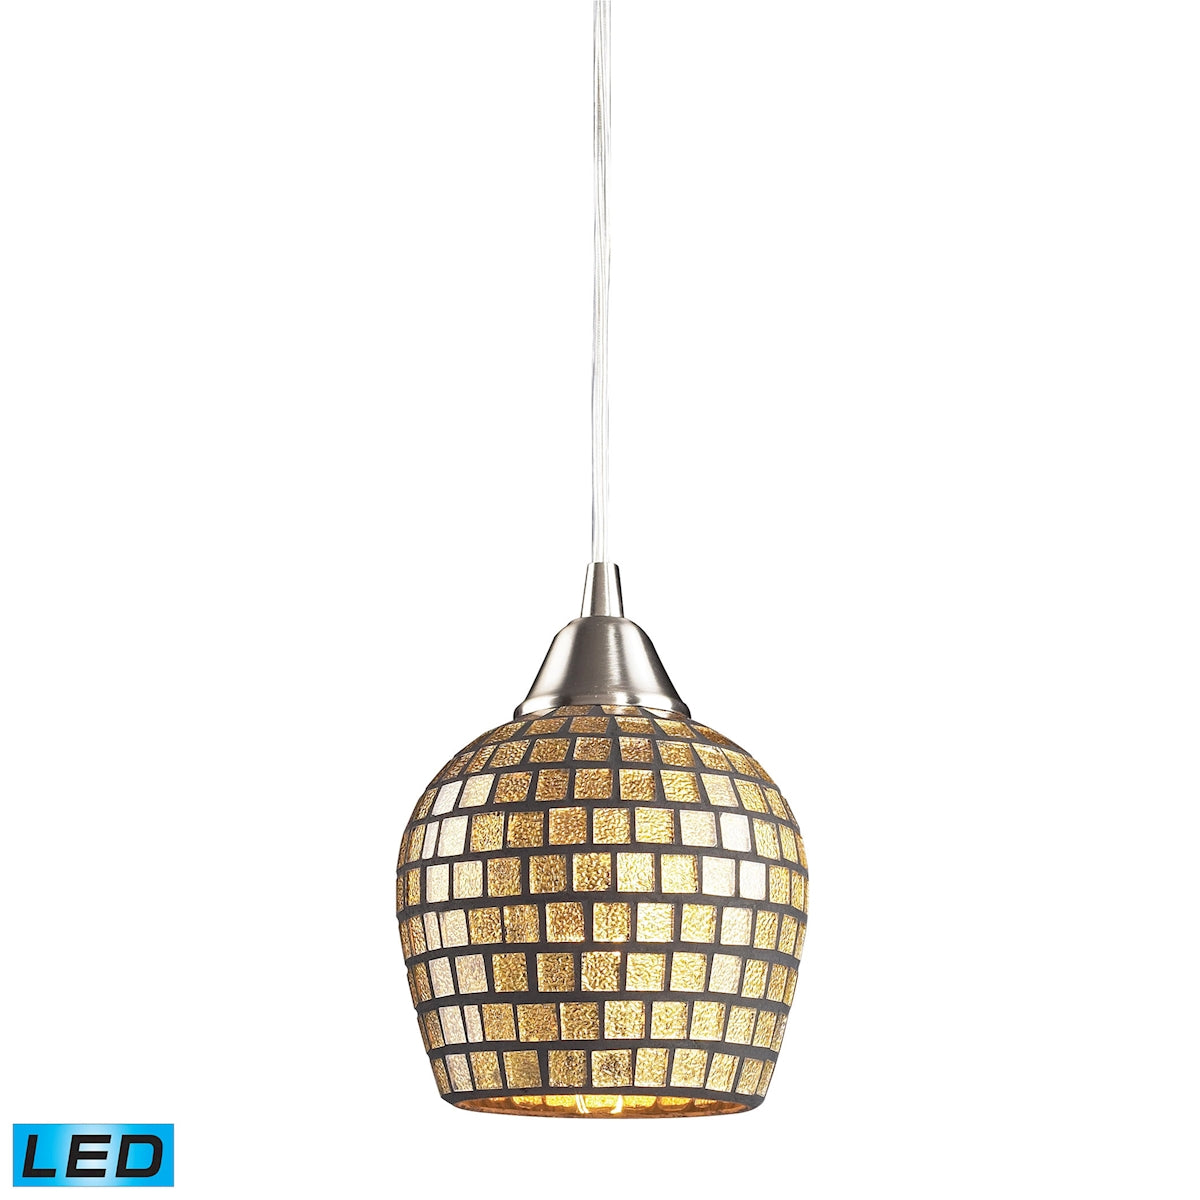 ELK Lighting 528-1GLD-LED Fusion 1-Light Mini Pendant in Satin Nickel with Gold Leaf Mosaic Glass - Includes LED Bulb